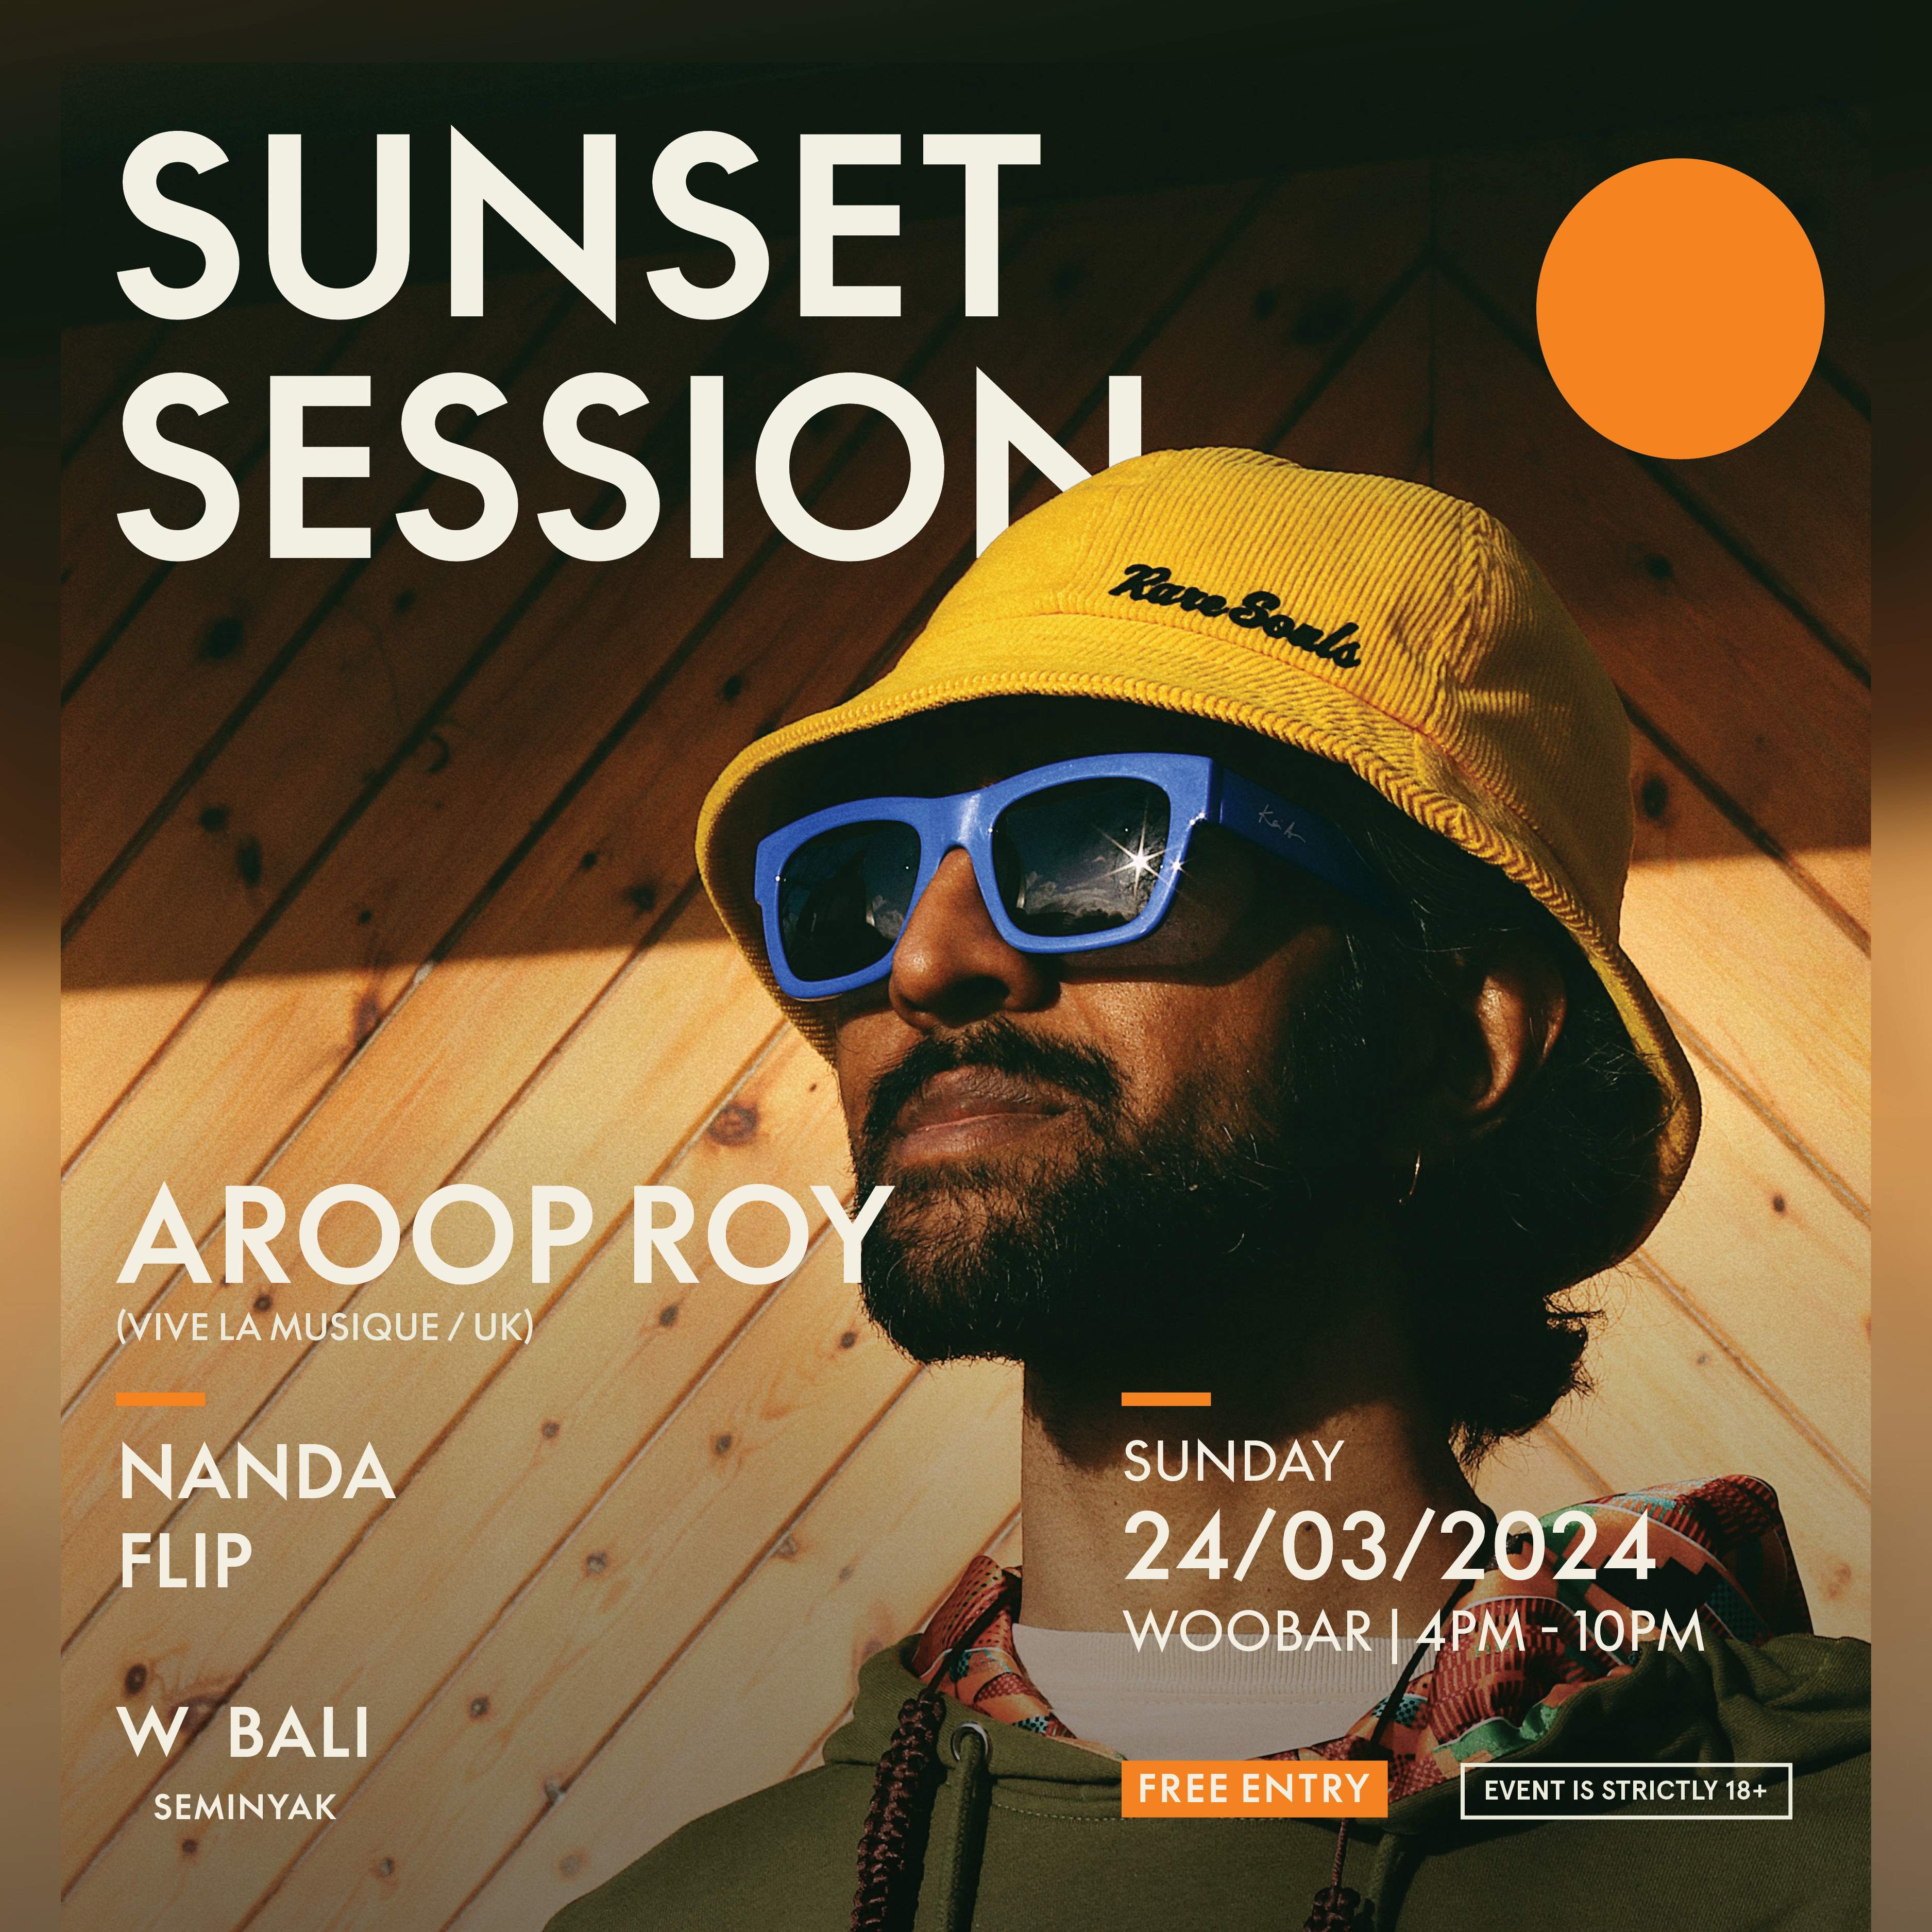 Sunset Session featuring Aroop Roy - Página frontal